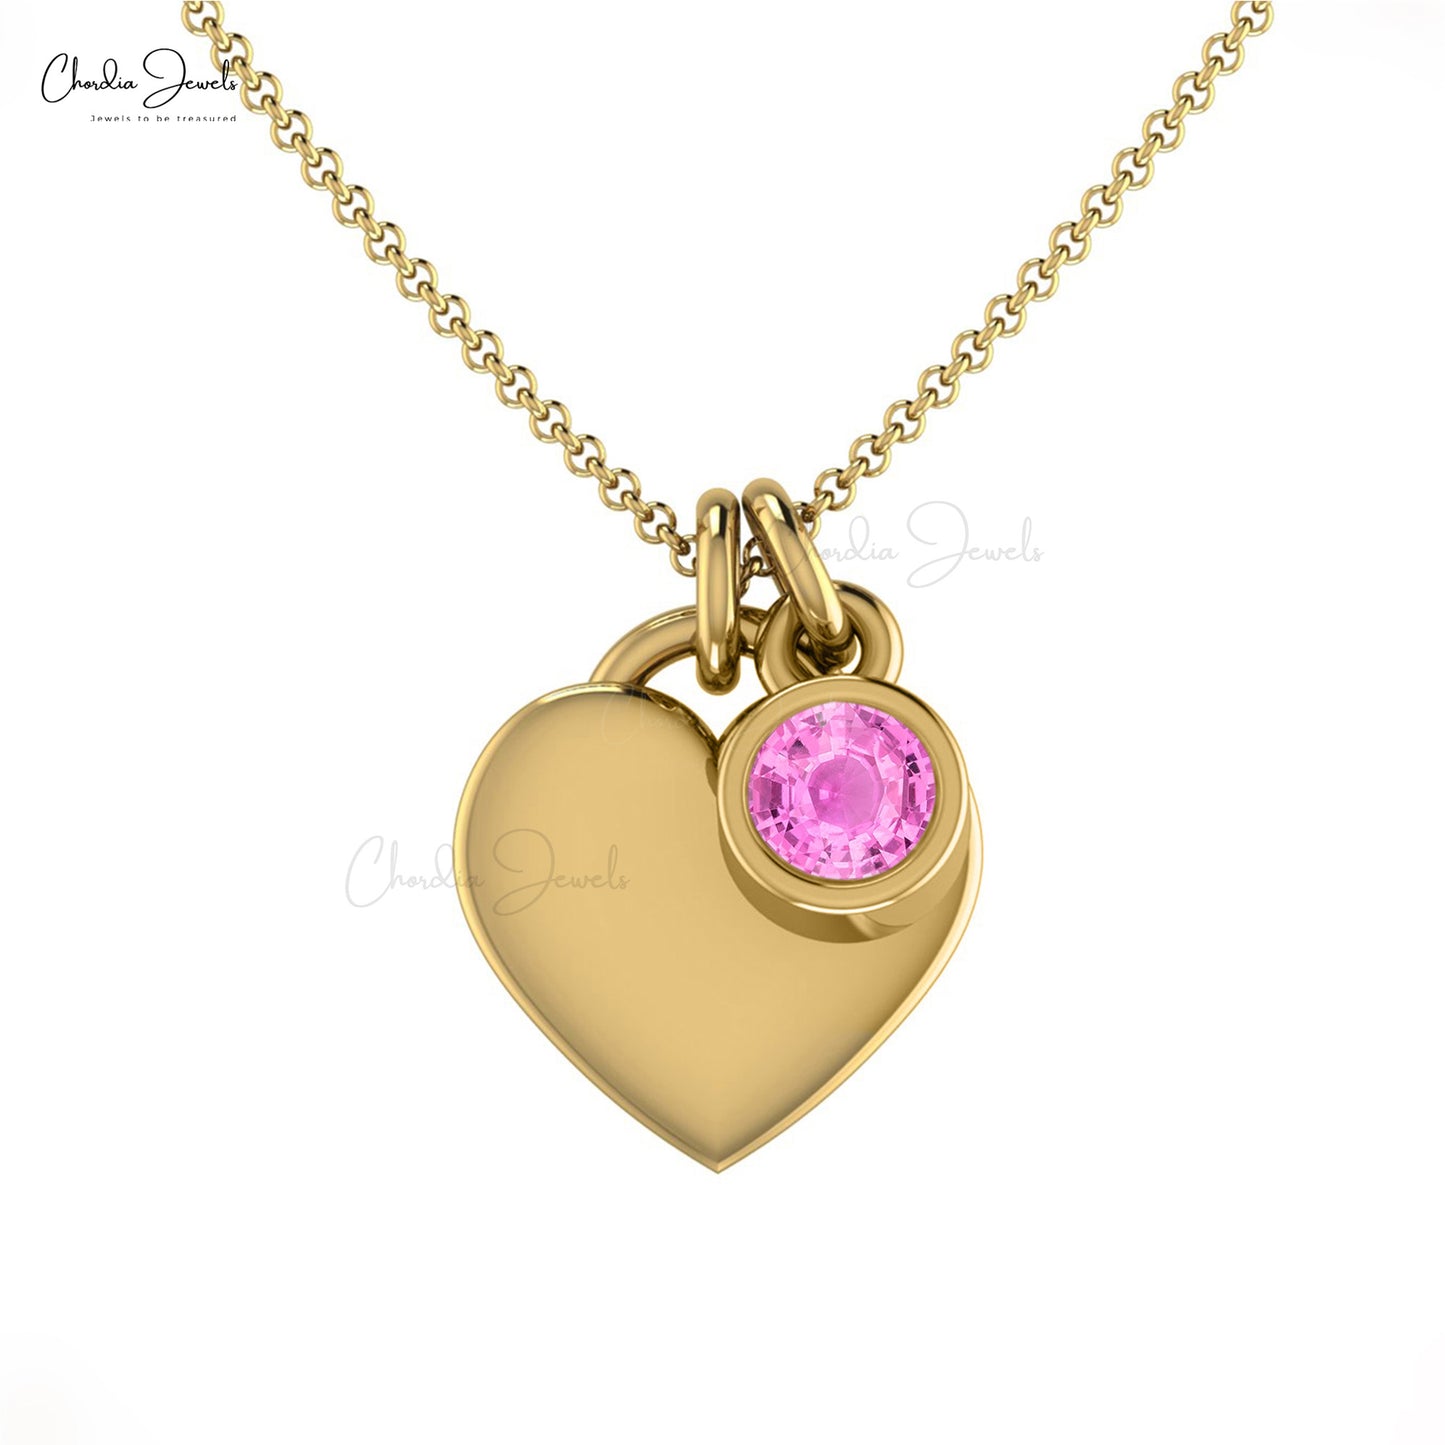 Bezel Set 0.17ct Pink Sapphire Heart Necklace 14k Real Gold Light Weight Solitaire Necklace